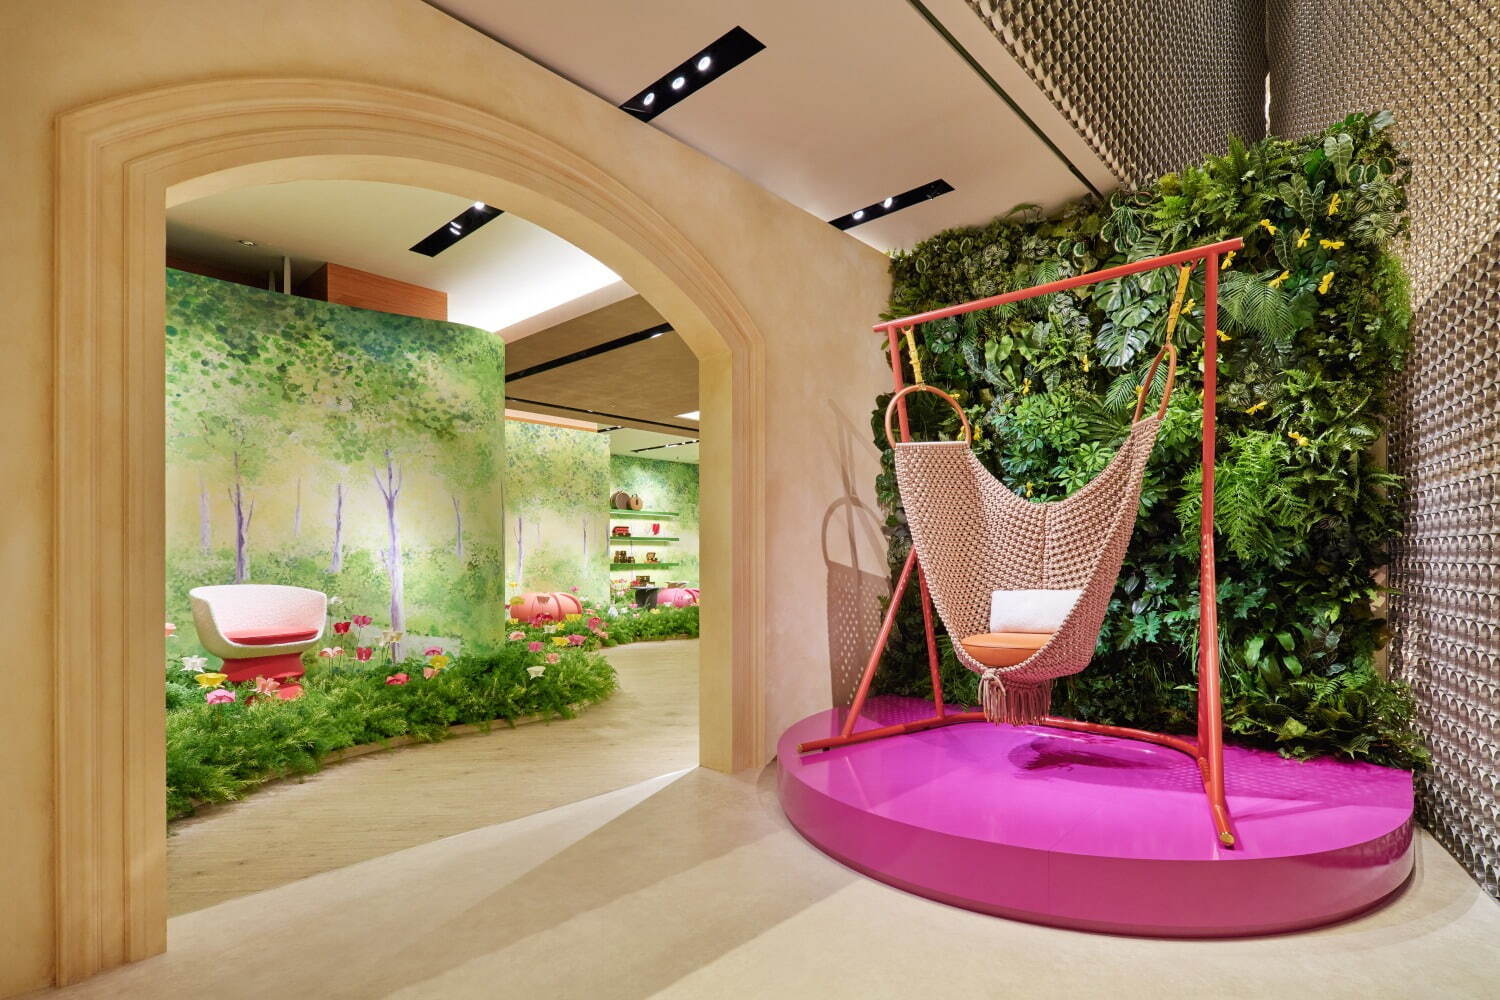 Louis Vuitton to host a limited-time event at the Roppongi Hills store with the theme of "Travel around the World.”